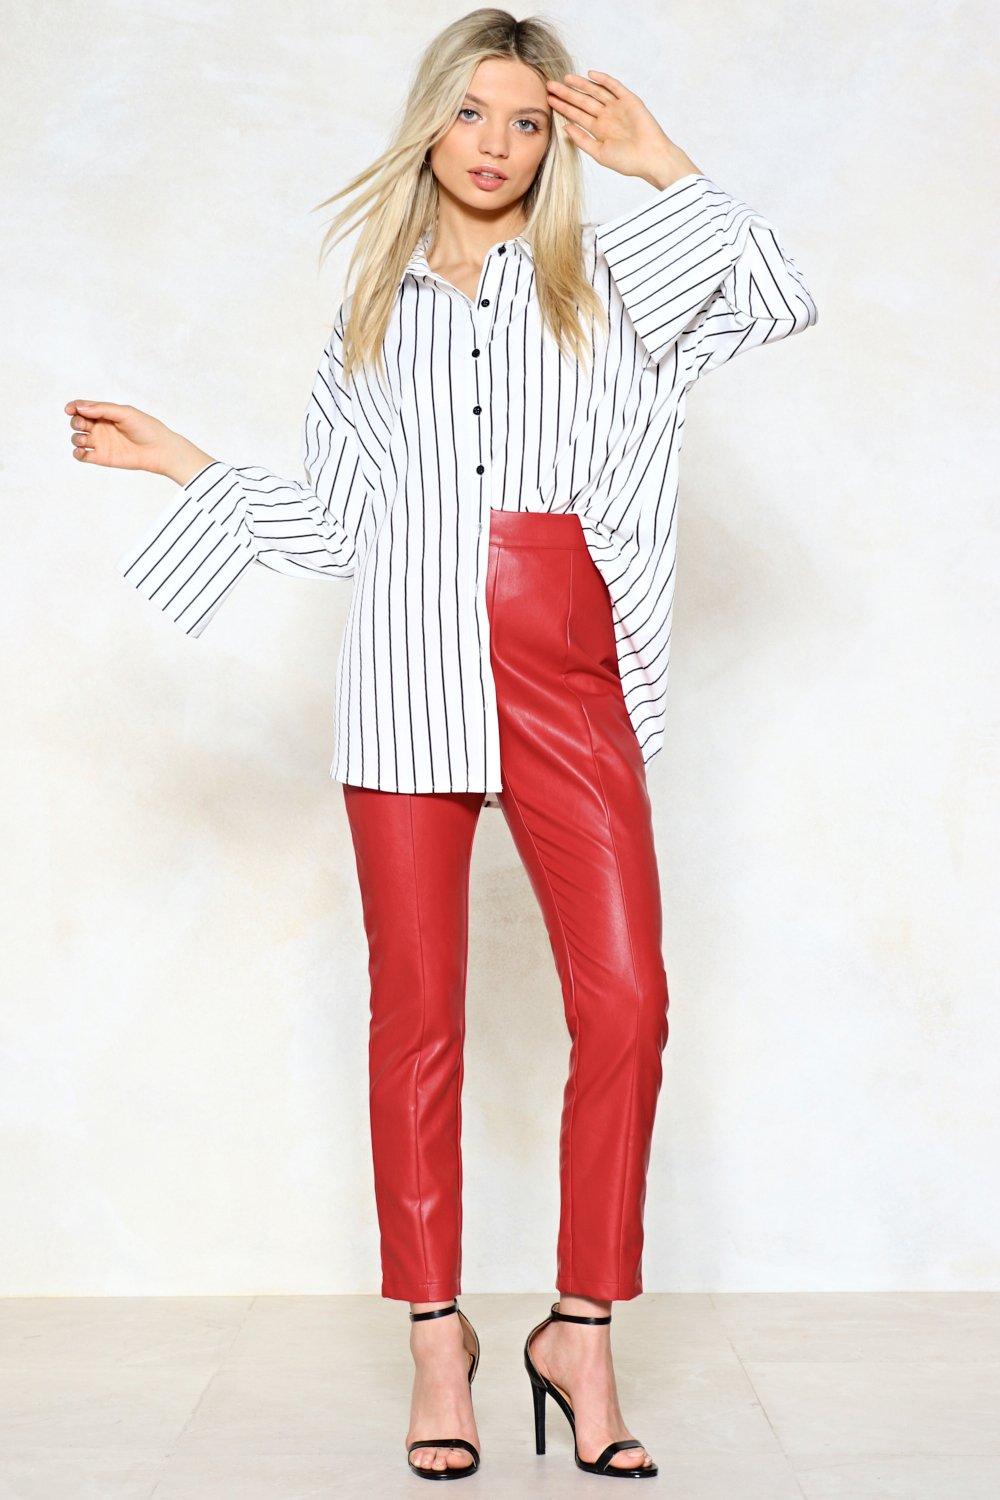 red high waisted faux leather pants